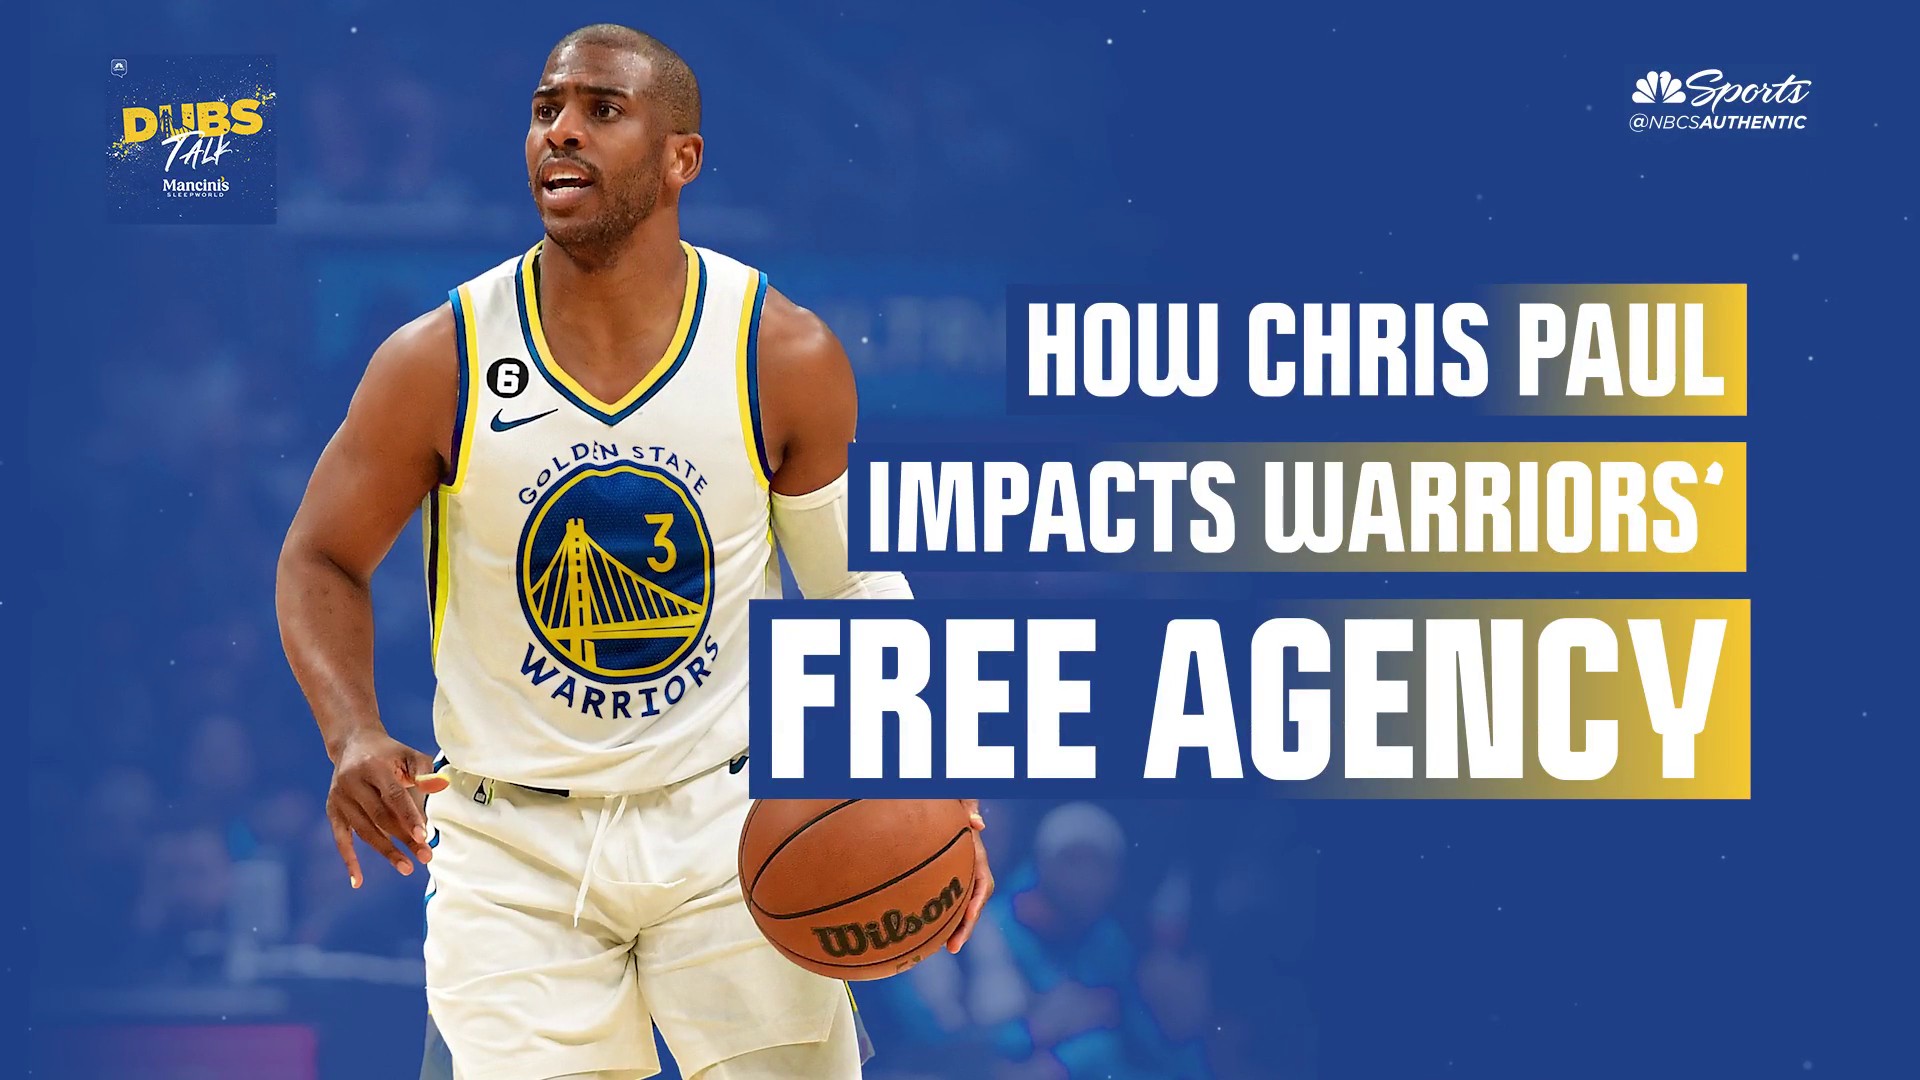 How Chris Paul impacts Warriors free agency